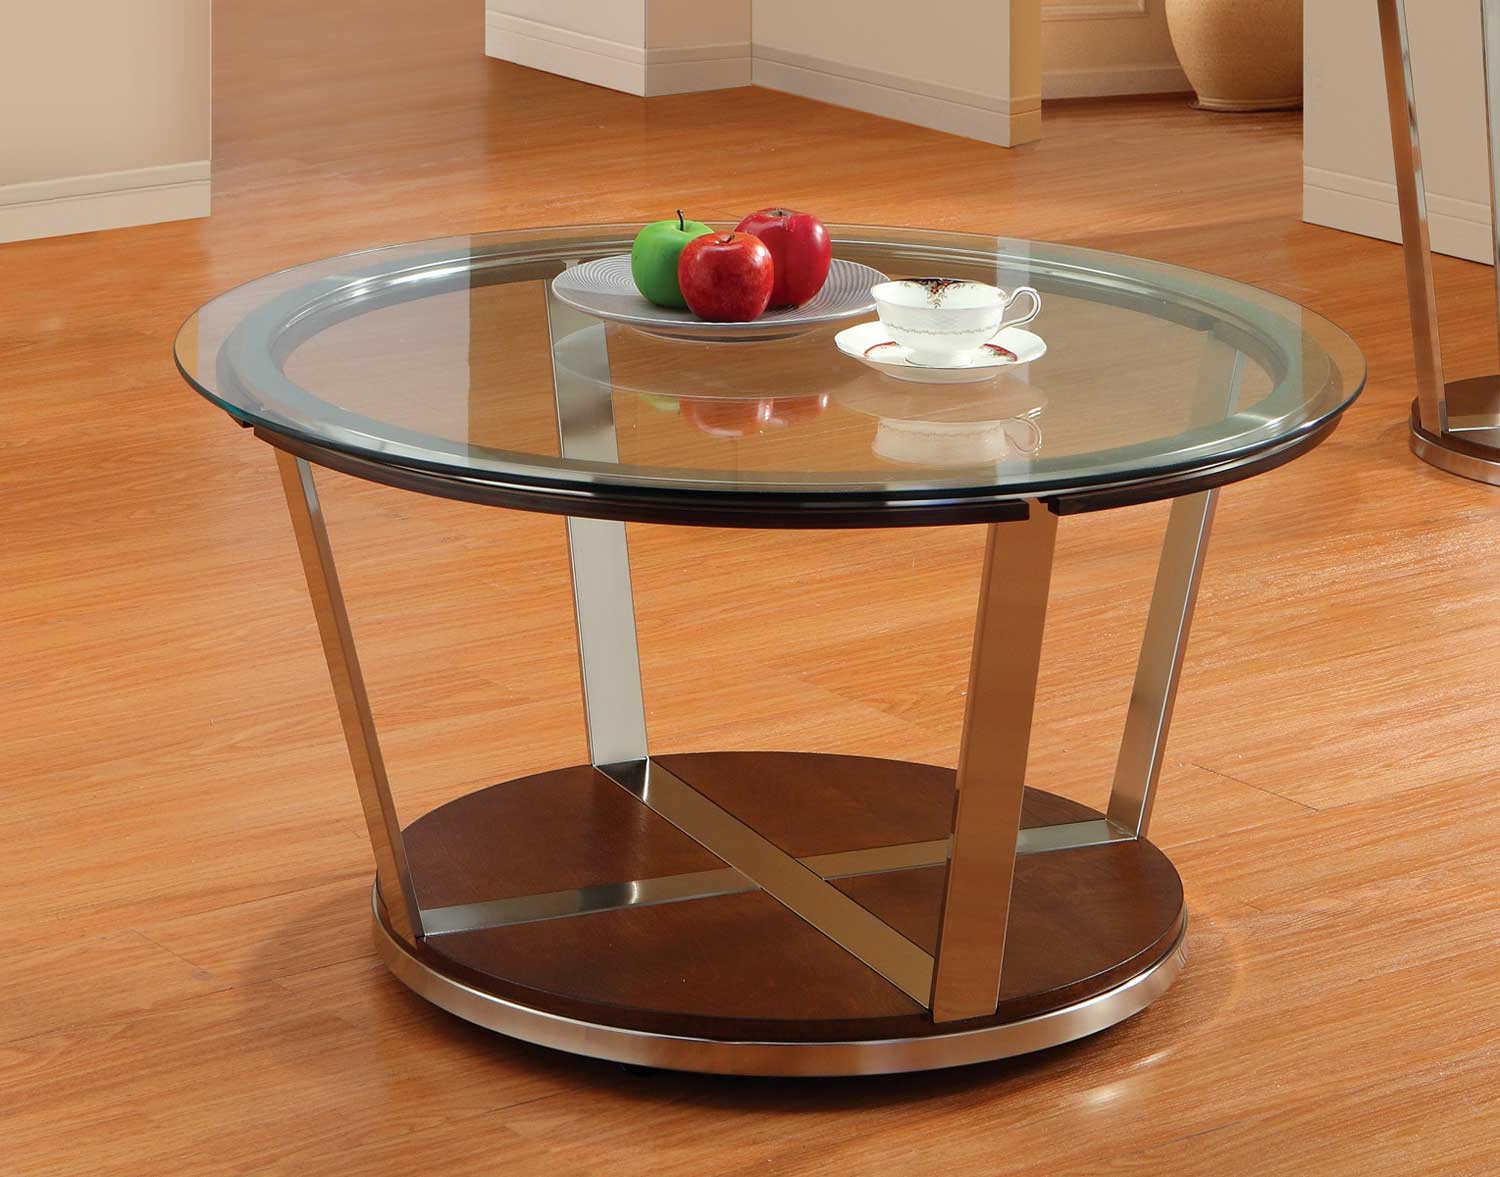 Homelegance Dunham Round Cocktail Table with Casters - Medium Brown Wood and Bronzed over Metal